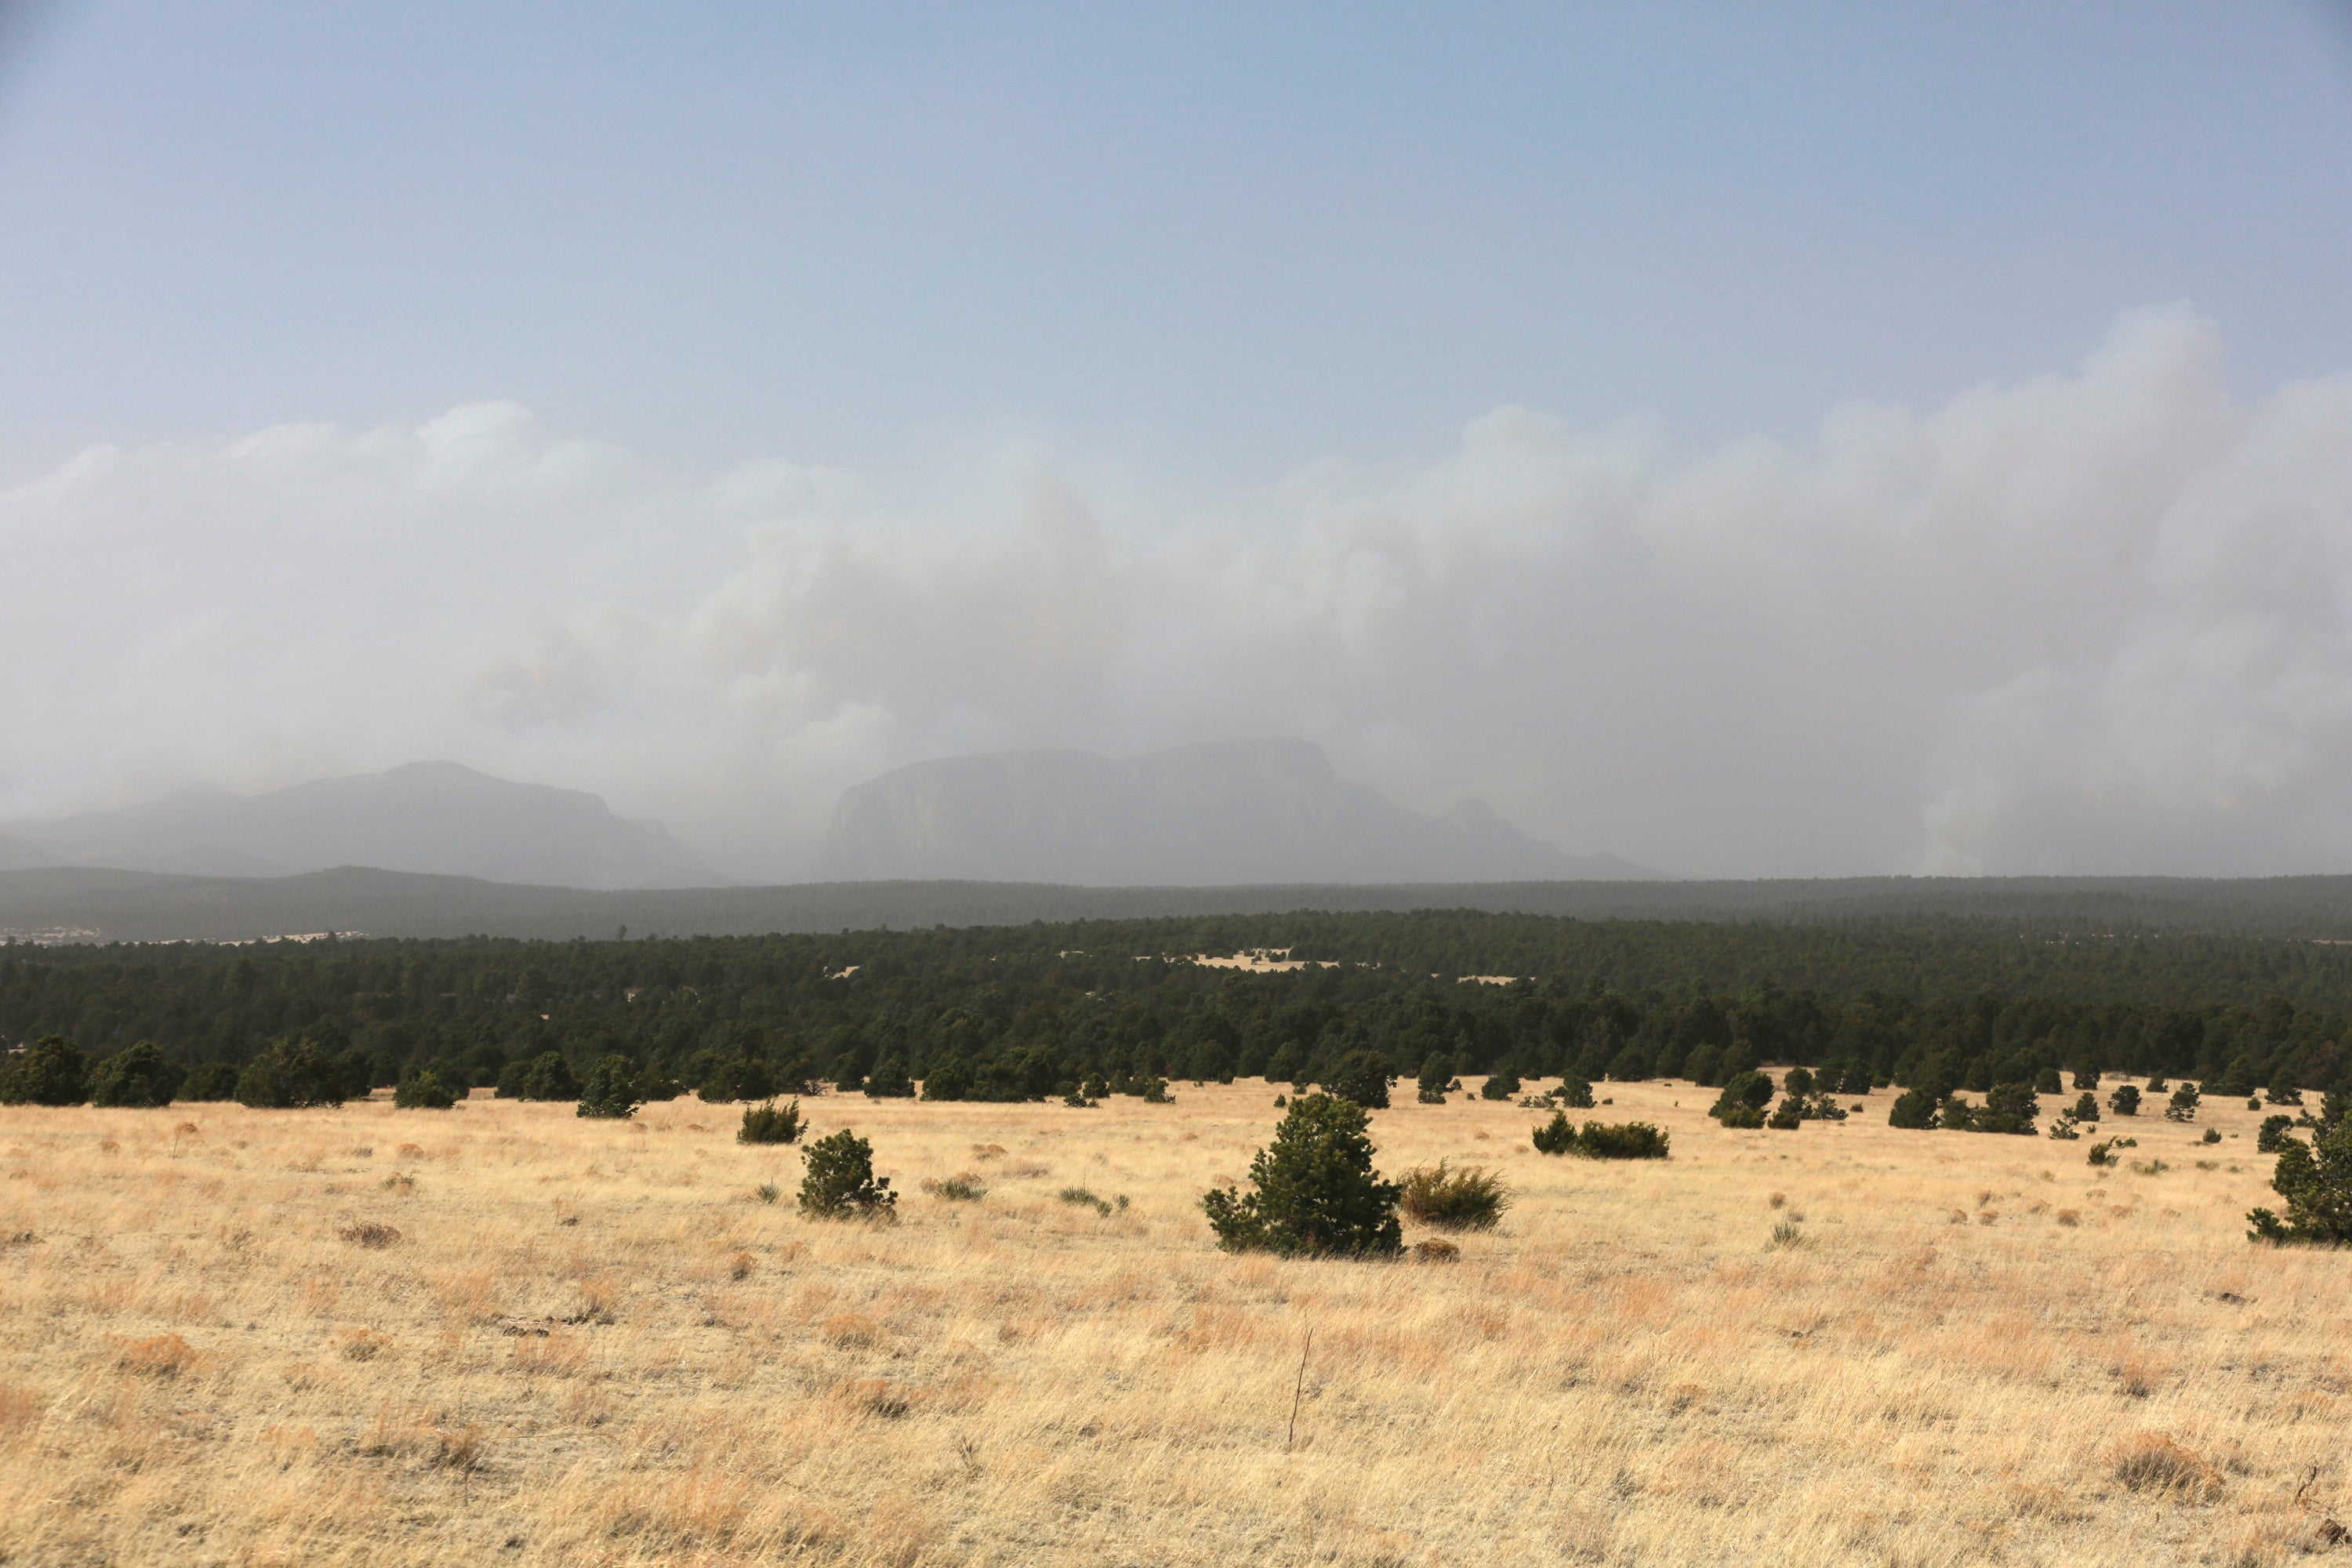 Wildfire smoke fills the air outside Las Vegas, New Mexico, near the Santa Fe National Forest, on Friday